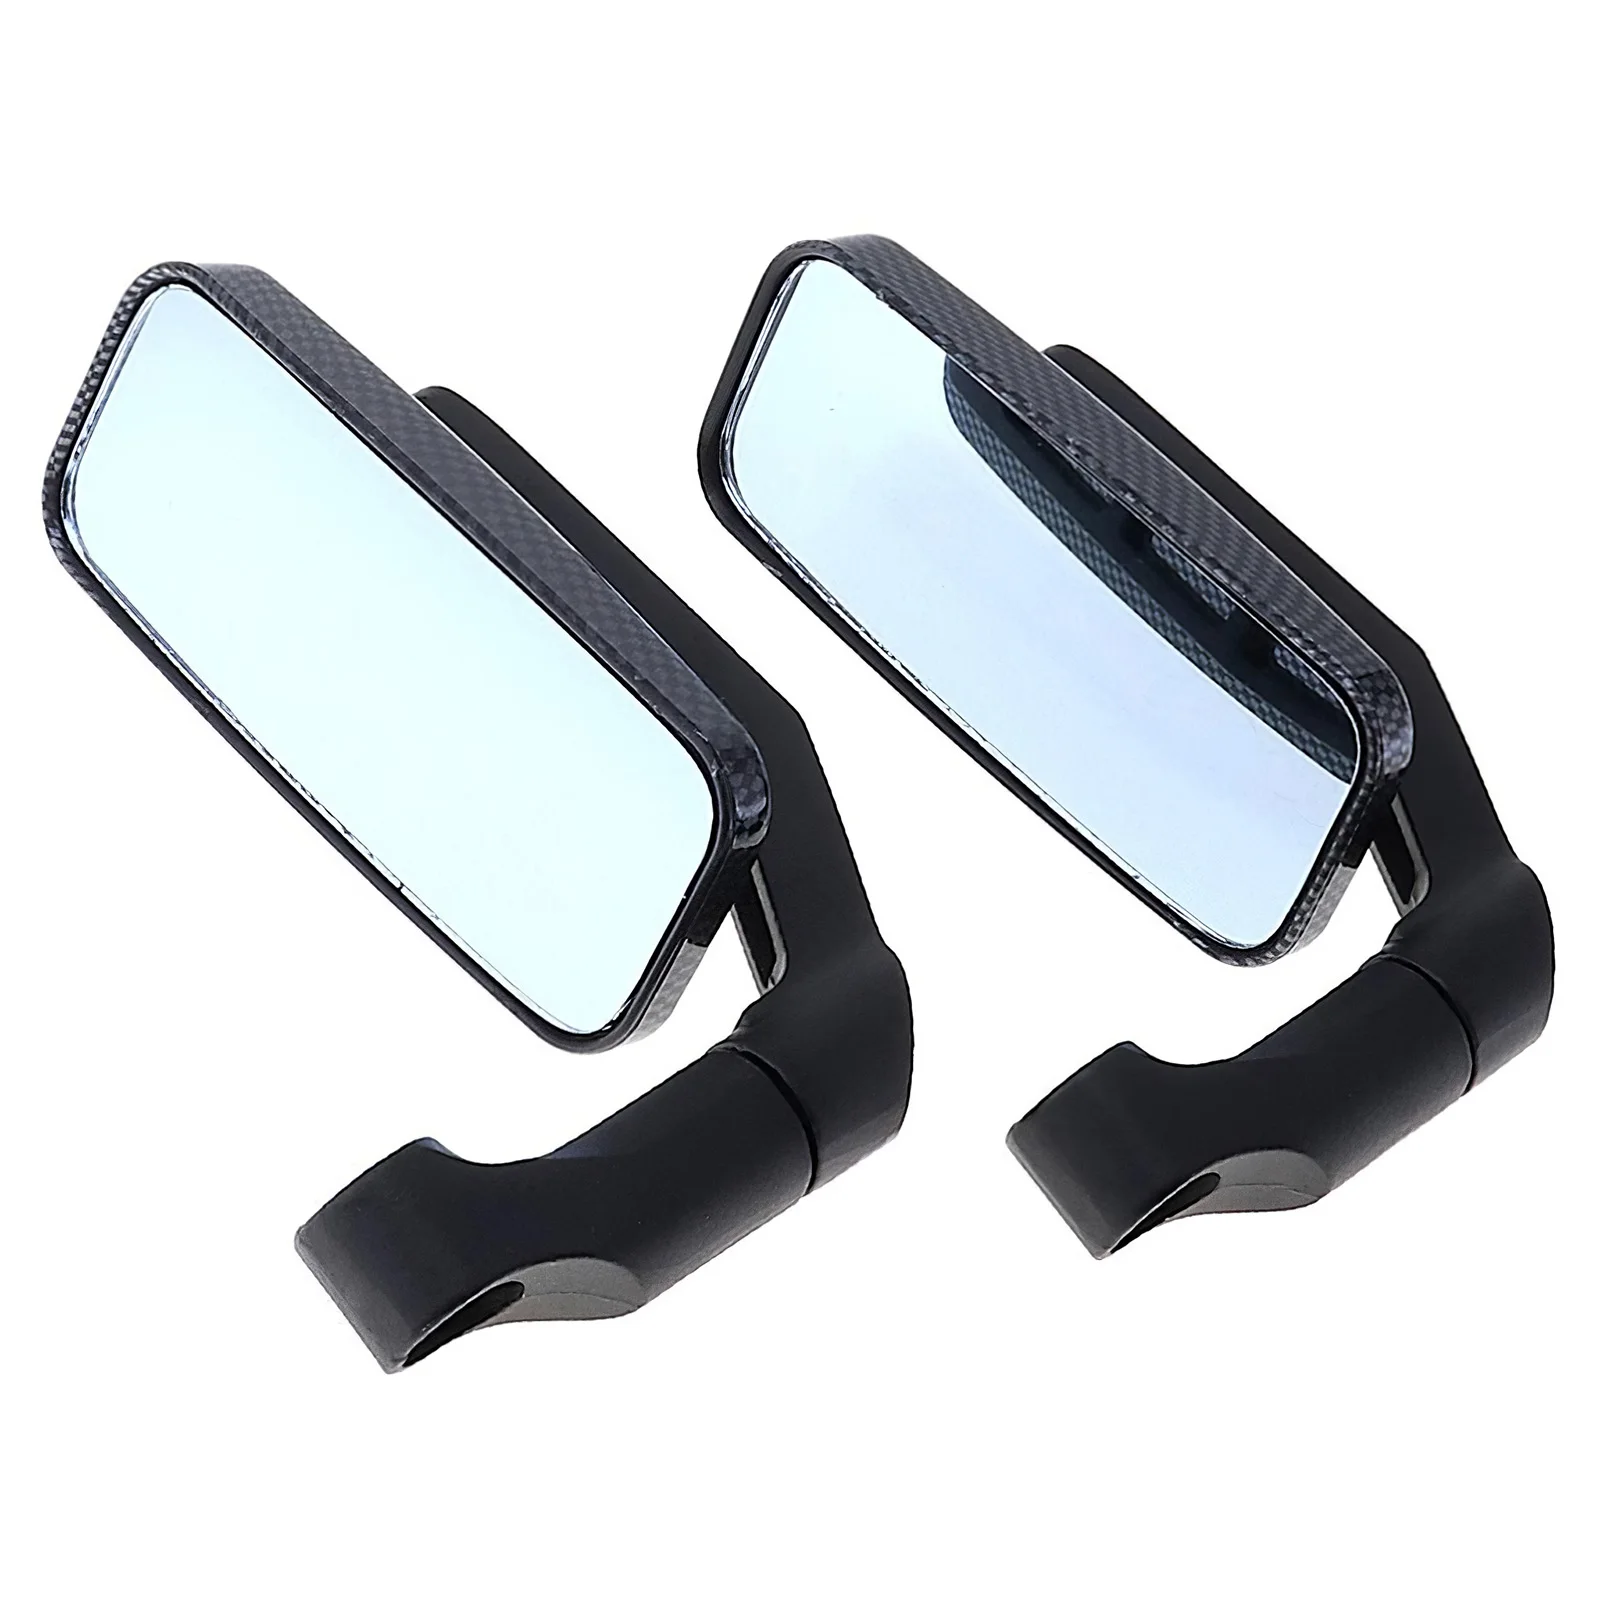 

2pcs Universal Motorcycle Rearview Mirror Clear Vision Side Mirrors with 360 Degrees Rotation Modified Reverse Rear View Mirror